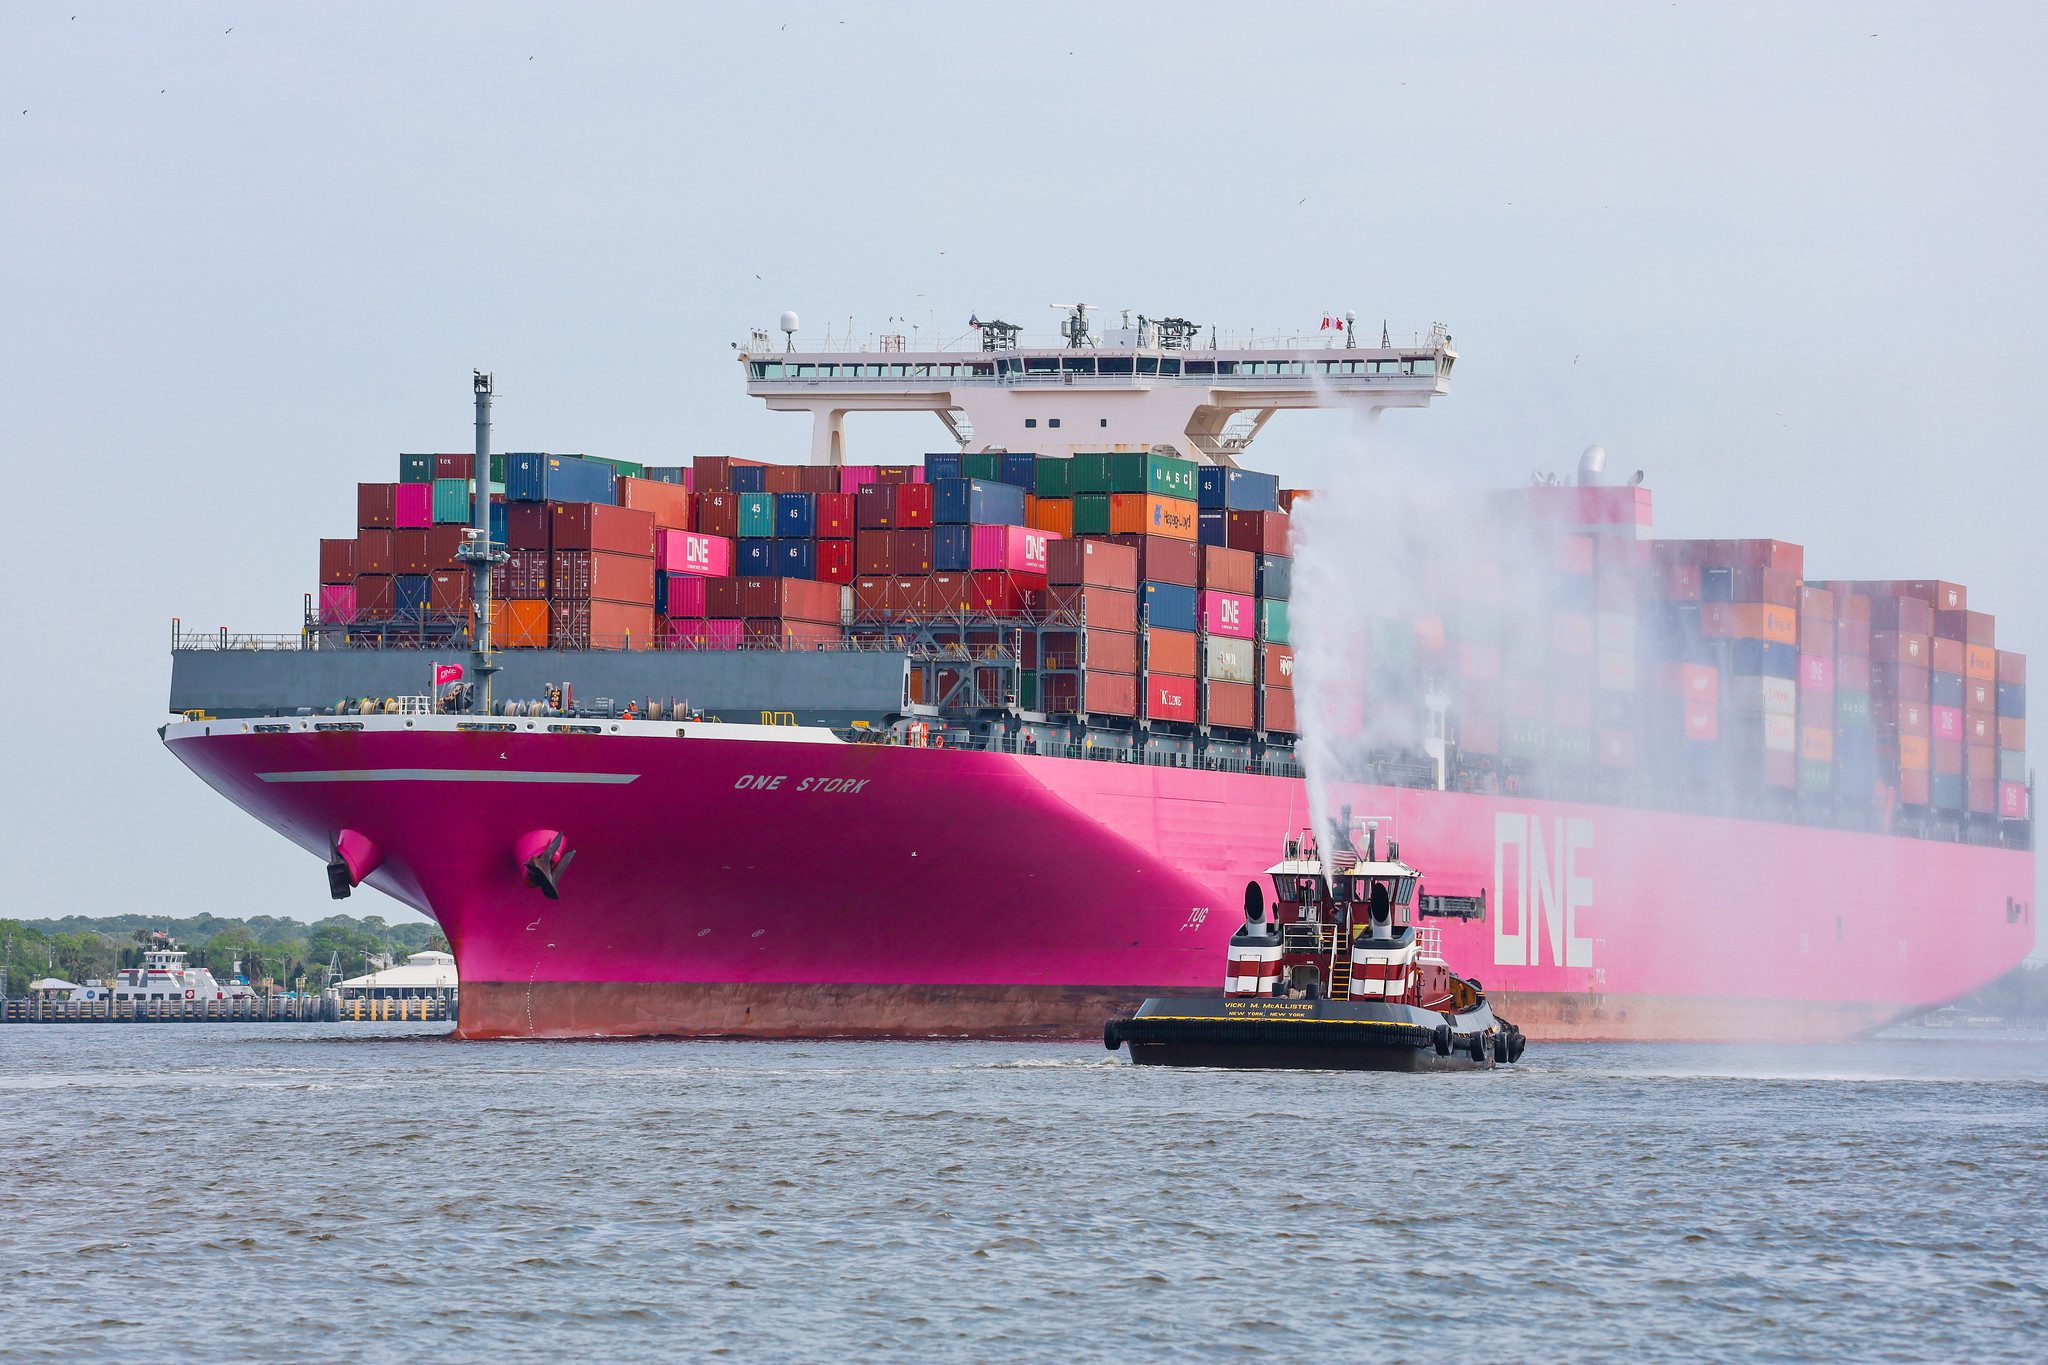 Deepened Jacksonville Port Sets New ‘Largest Ship’ Record